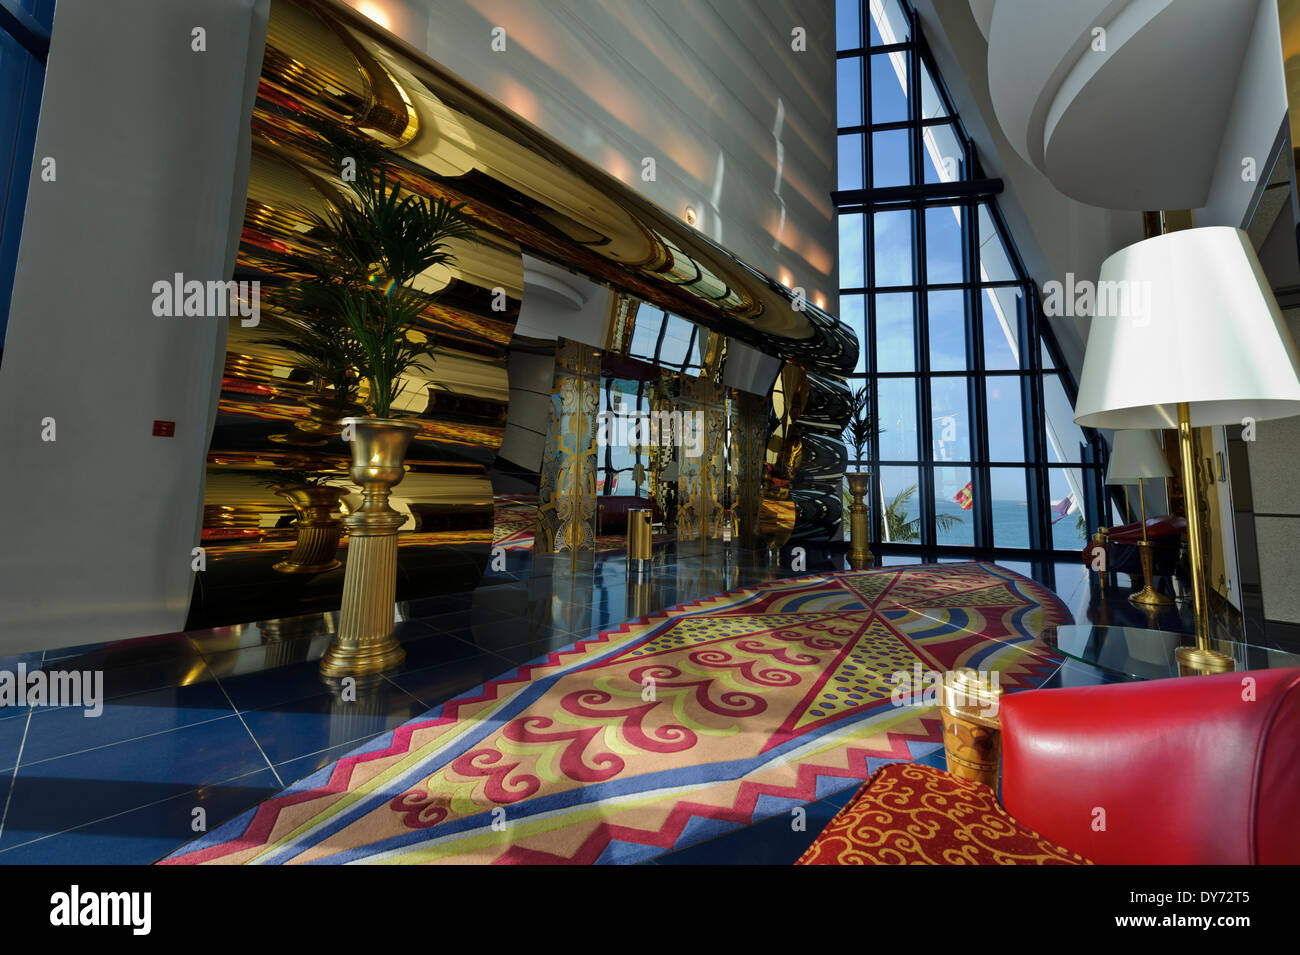 The superb interior at the Burj Al Arab, classed as one of the most luxurious hotels in the world, United Arab Emirates, UAE. Stock Photo